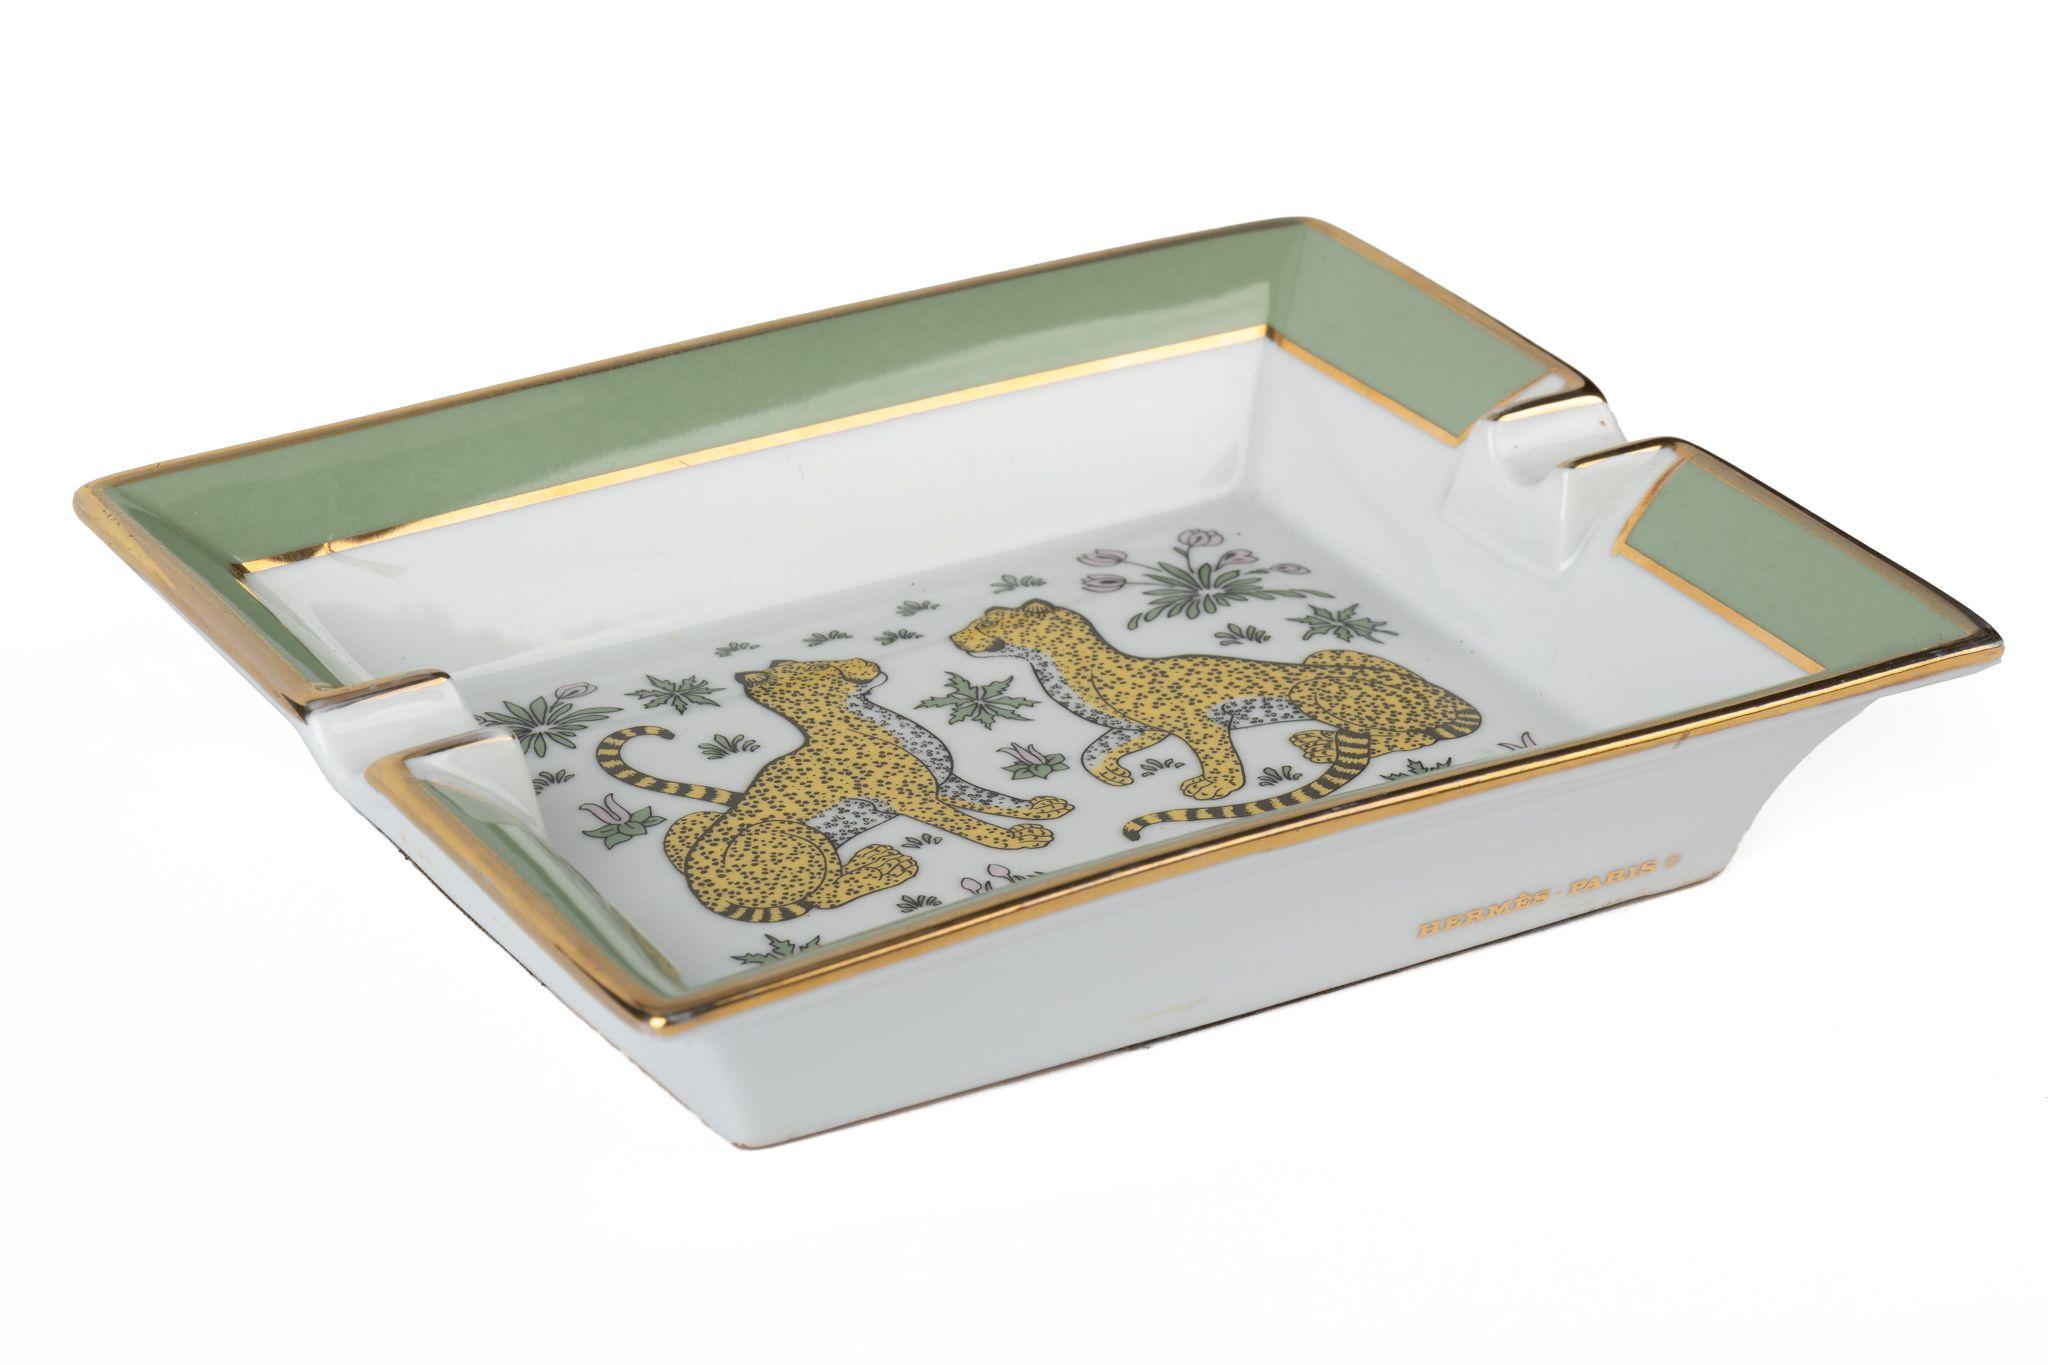 Hermès vintage white ashtray with green edges and two leopards in the center. The edges are colored green. Suede stamped bottom. Comes with original box. Minor wear on bottom suede.